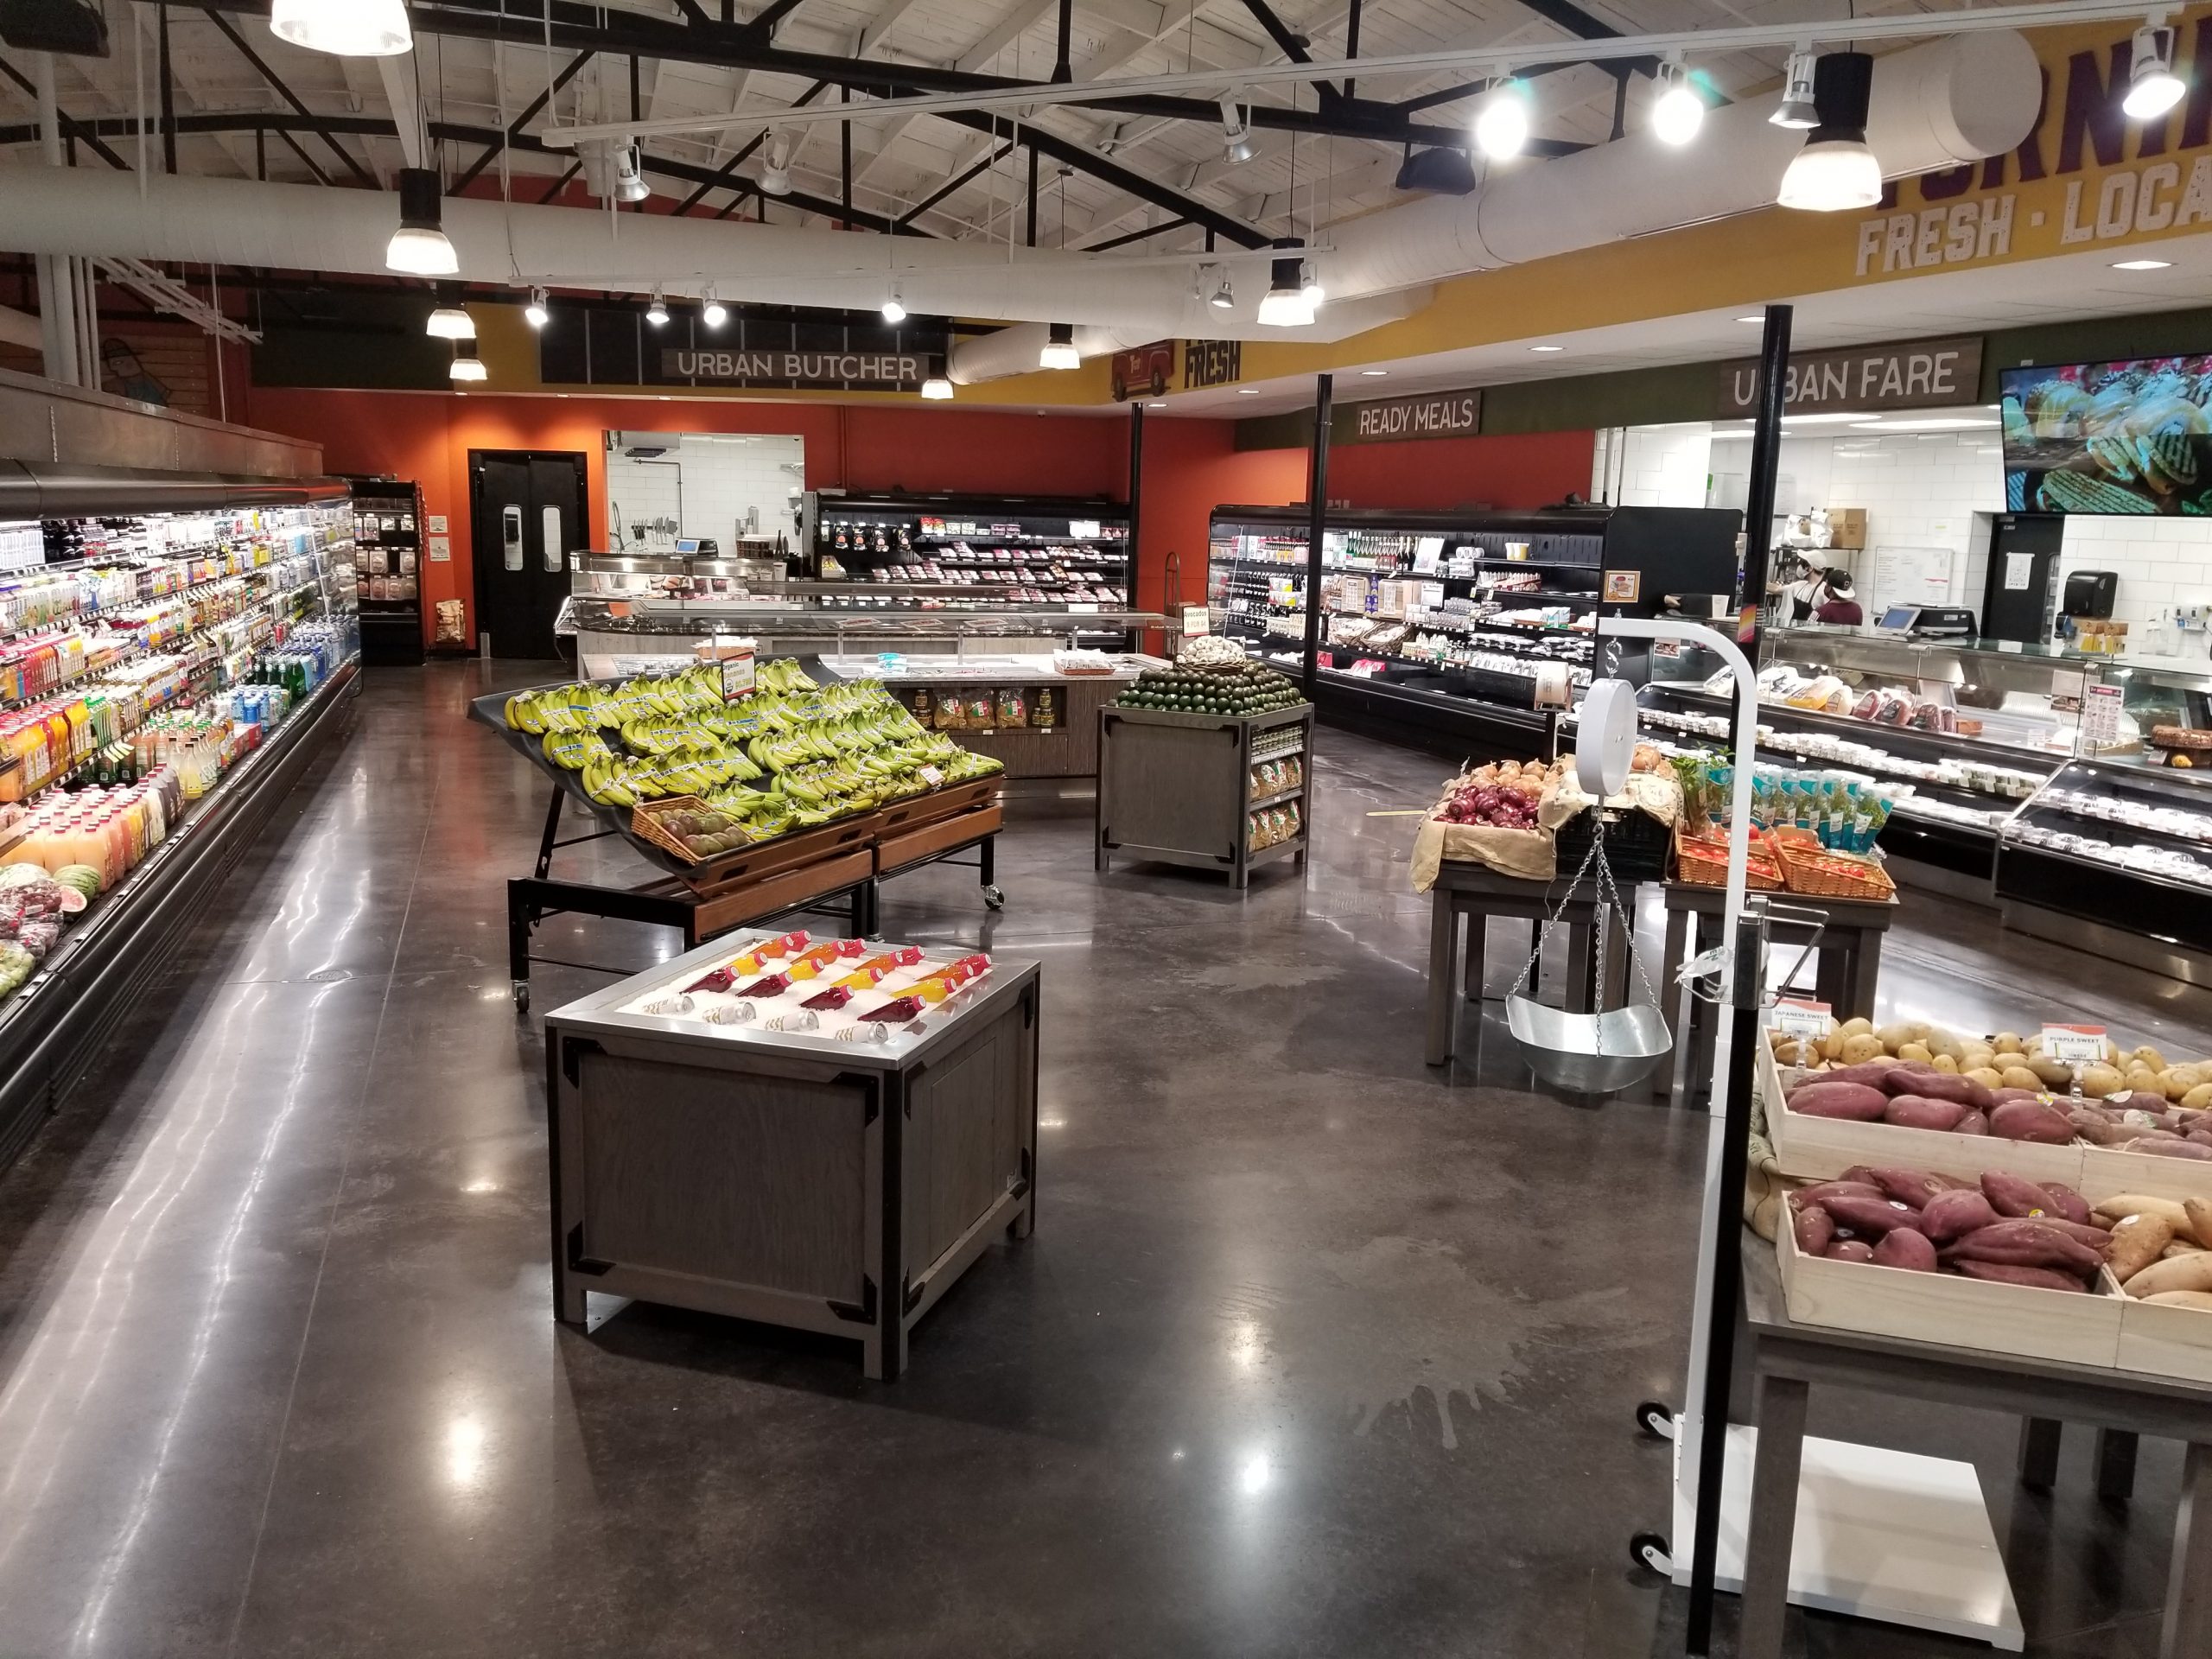 StoreMasters interior plan incorporated grab-and-go foods, deli, juice bar, bakery, bulk foods, and growler filling station